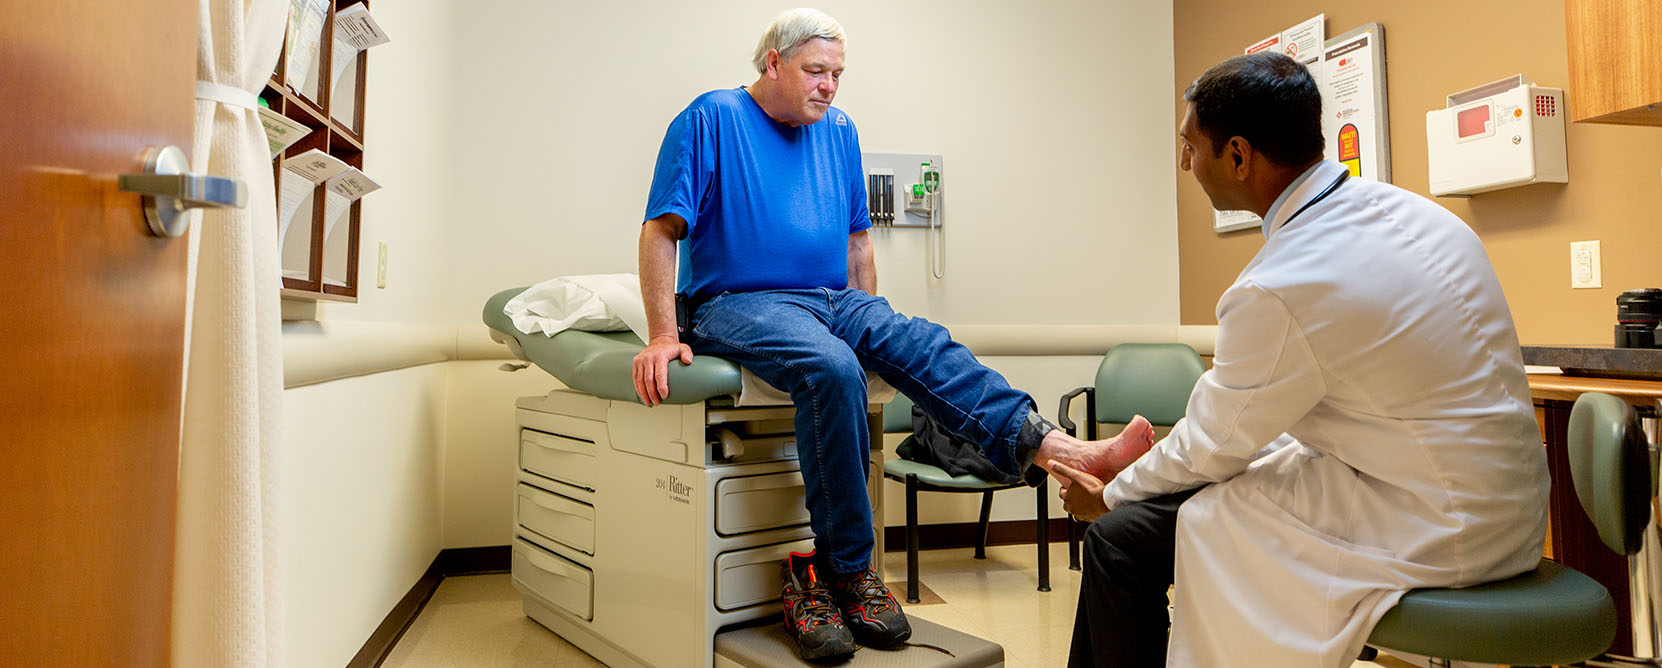 Older adult patient receives a foot exam by a doctor.